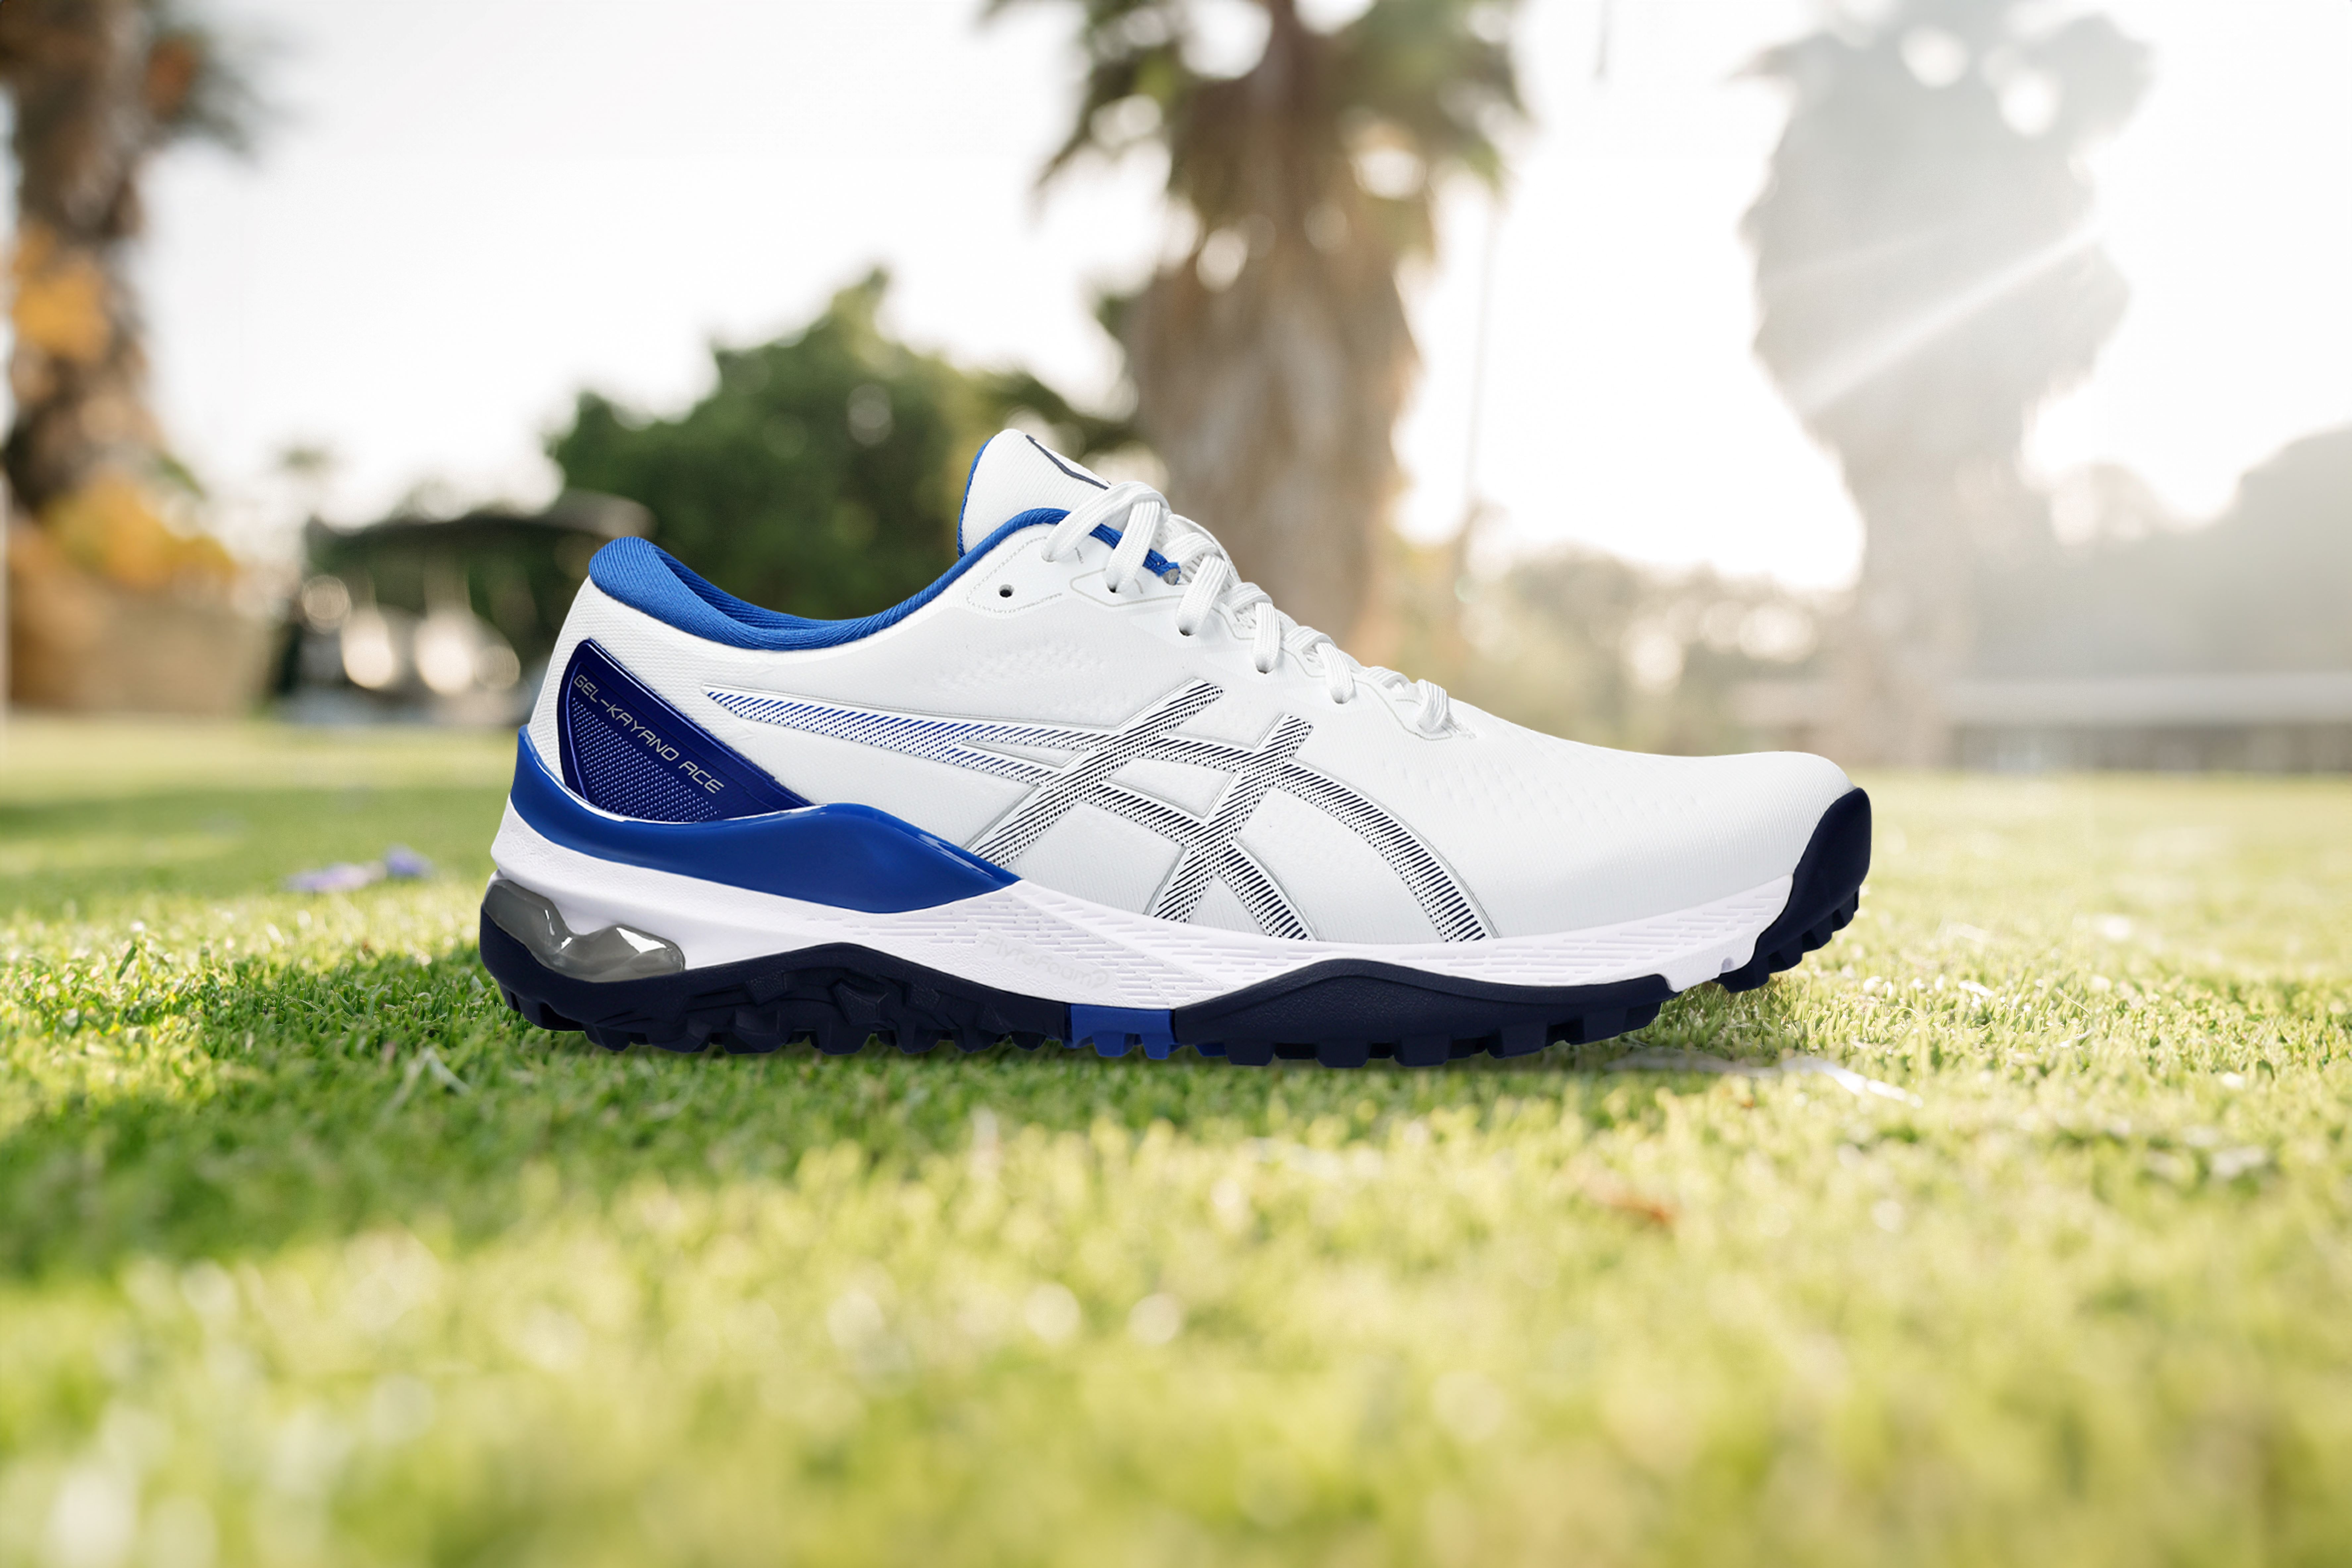 Enjoy a Smooth, Comfortable Stride With ASICS GEL-KAYANO ACE 2